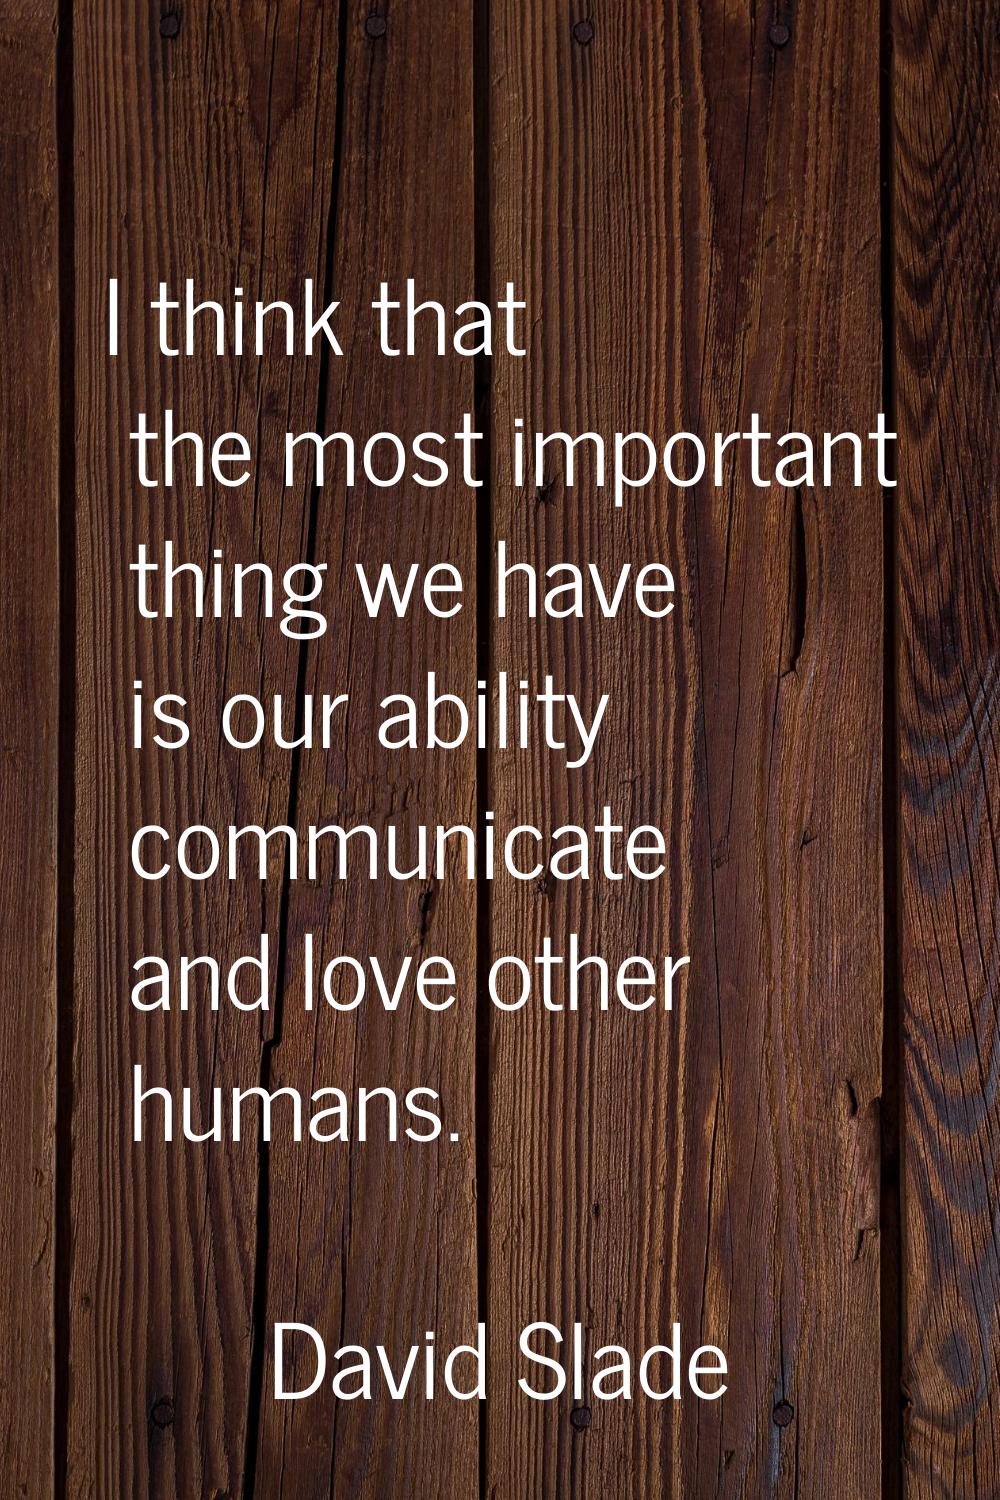 I think that the most important thing we have is our ability communicate and love other humans.